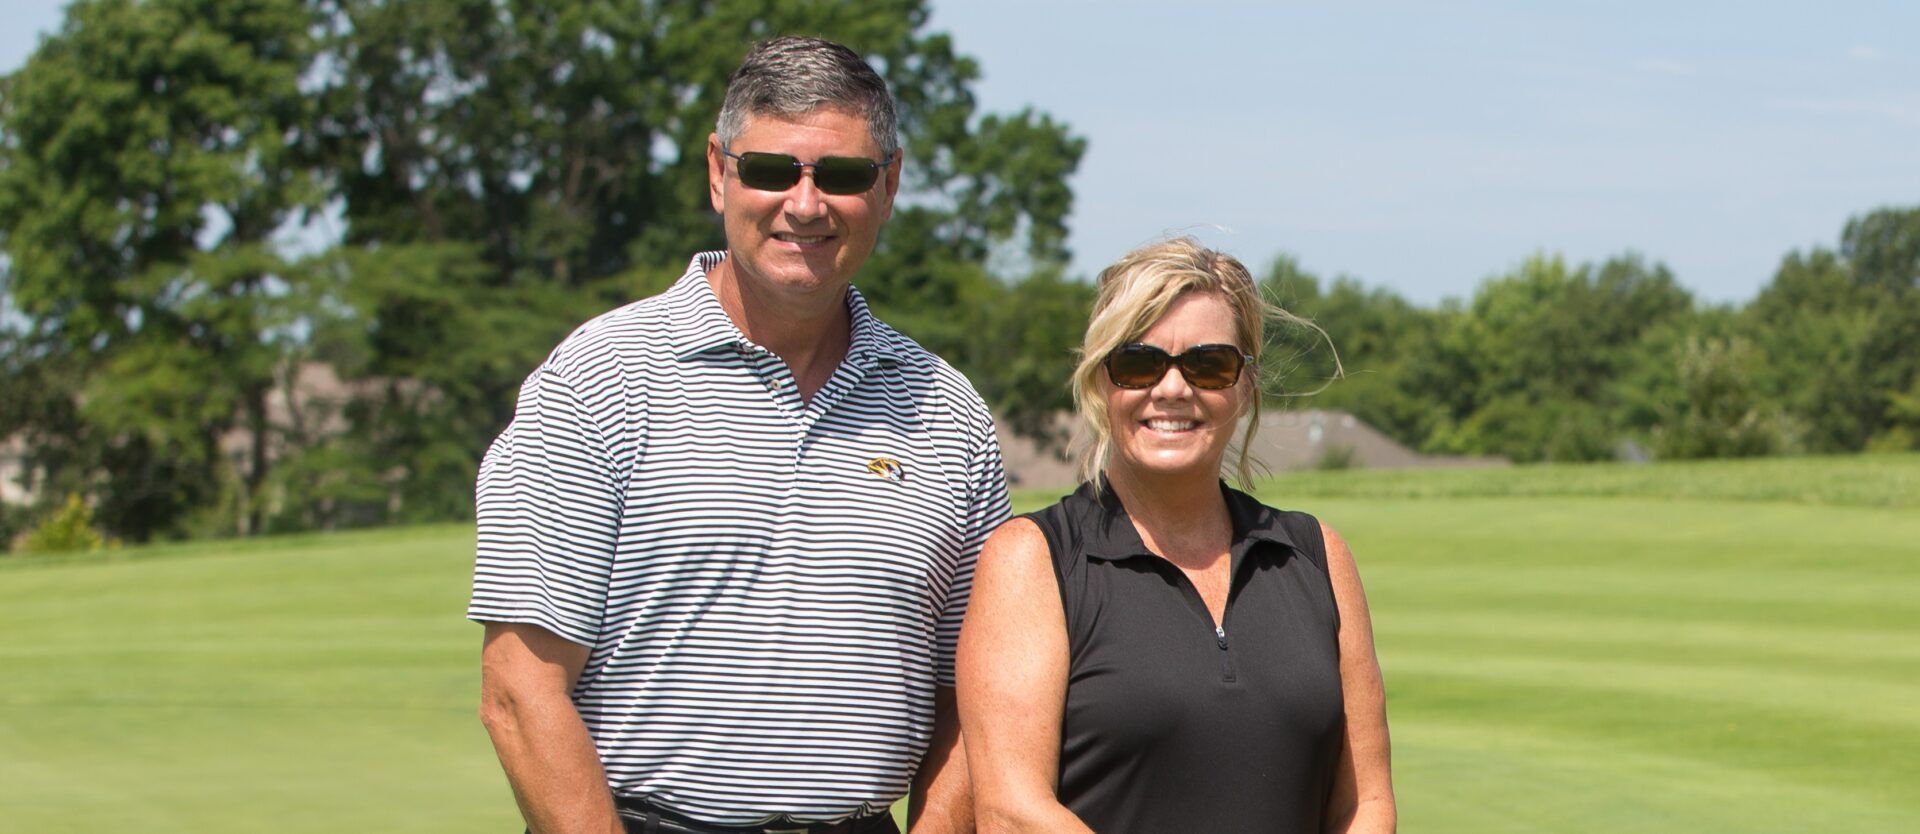 man and his wife standing on a golf course smiling at the camera